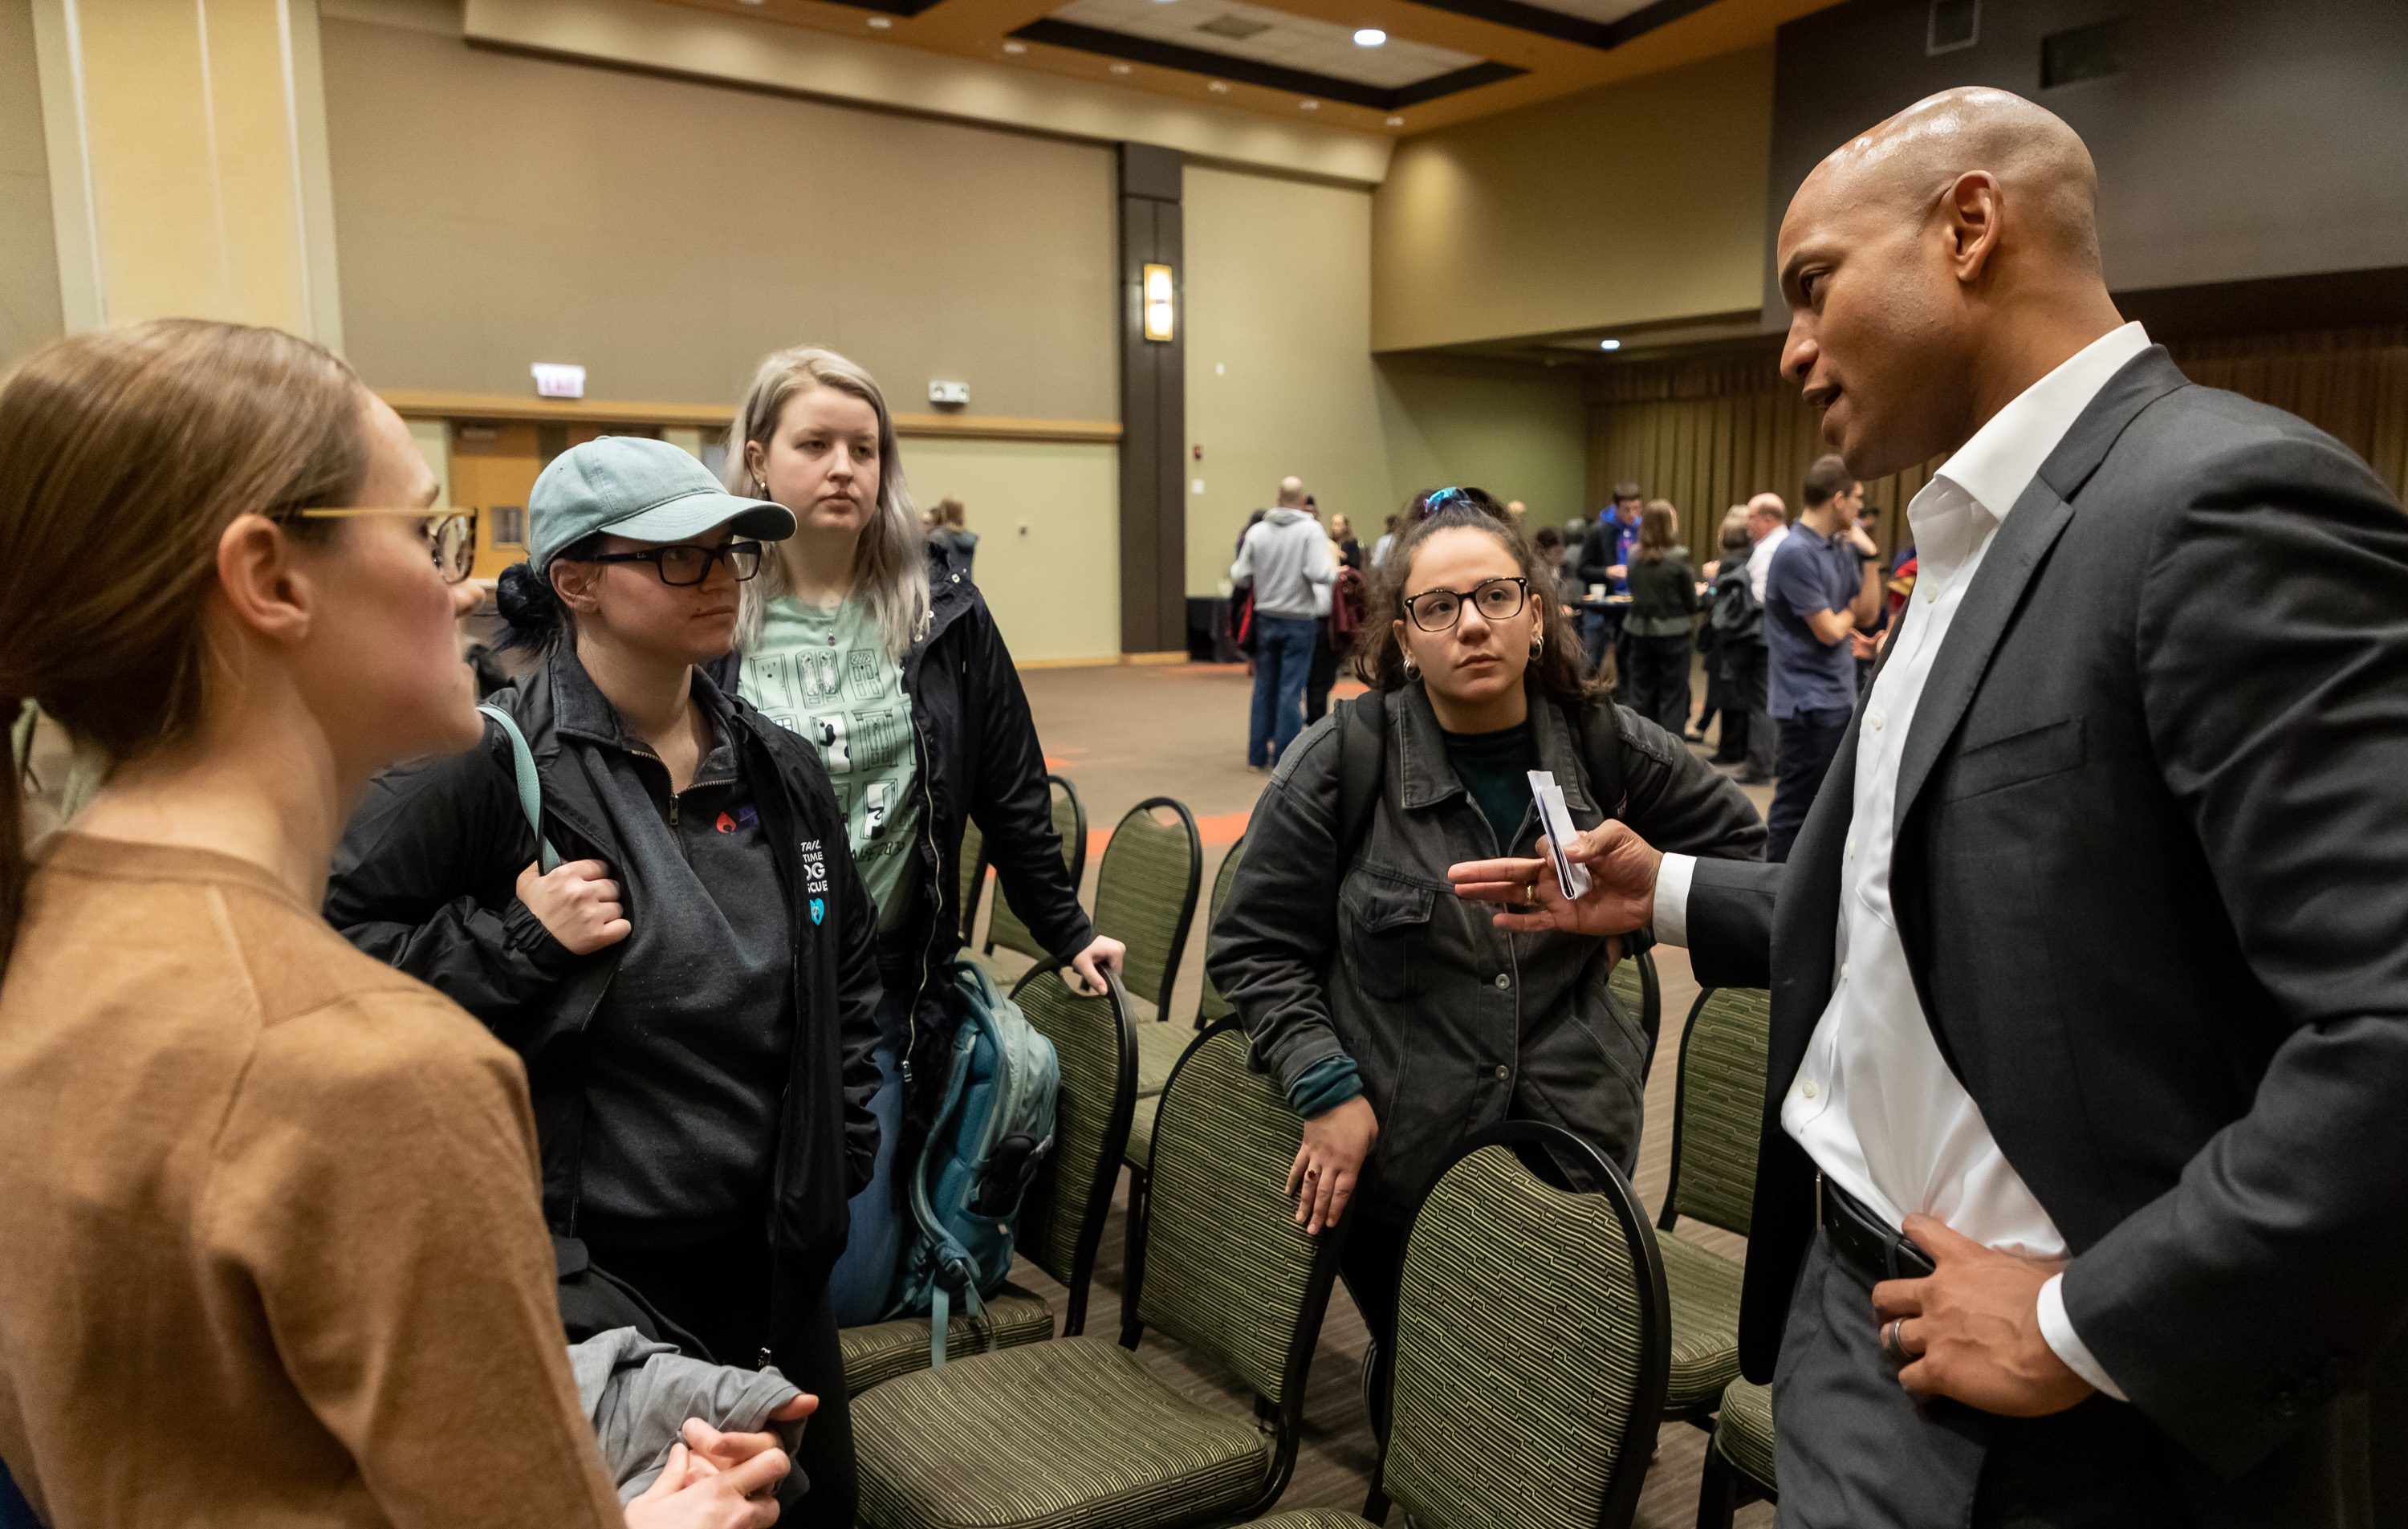 Wes Moore talks with students who attended the presentation during a reception after the event. (DePaul University/Jeff Carrion)